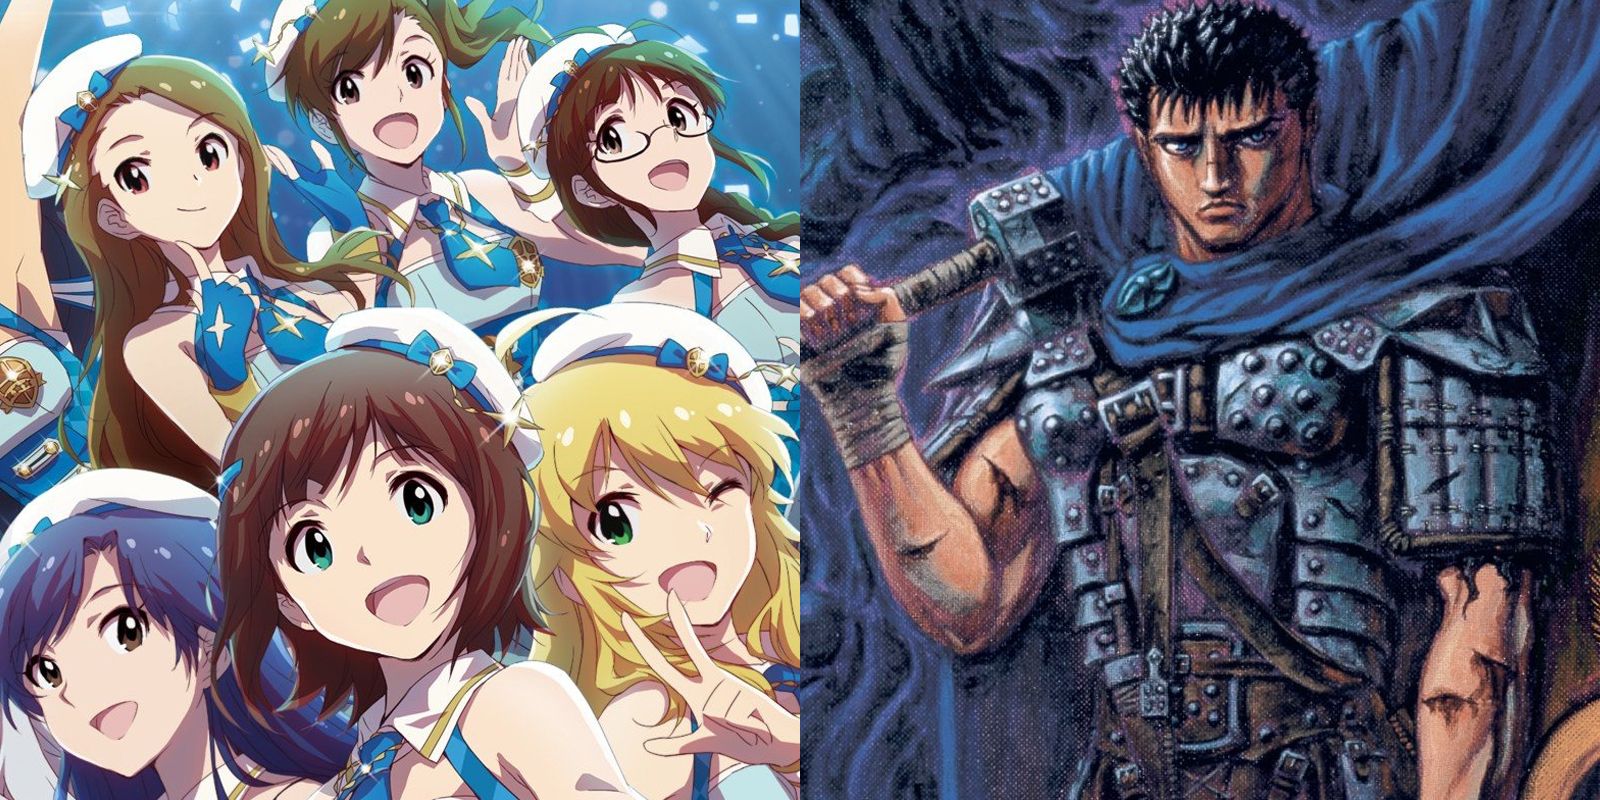 Teaching Students About Berserk Anime - The Edvocate